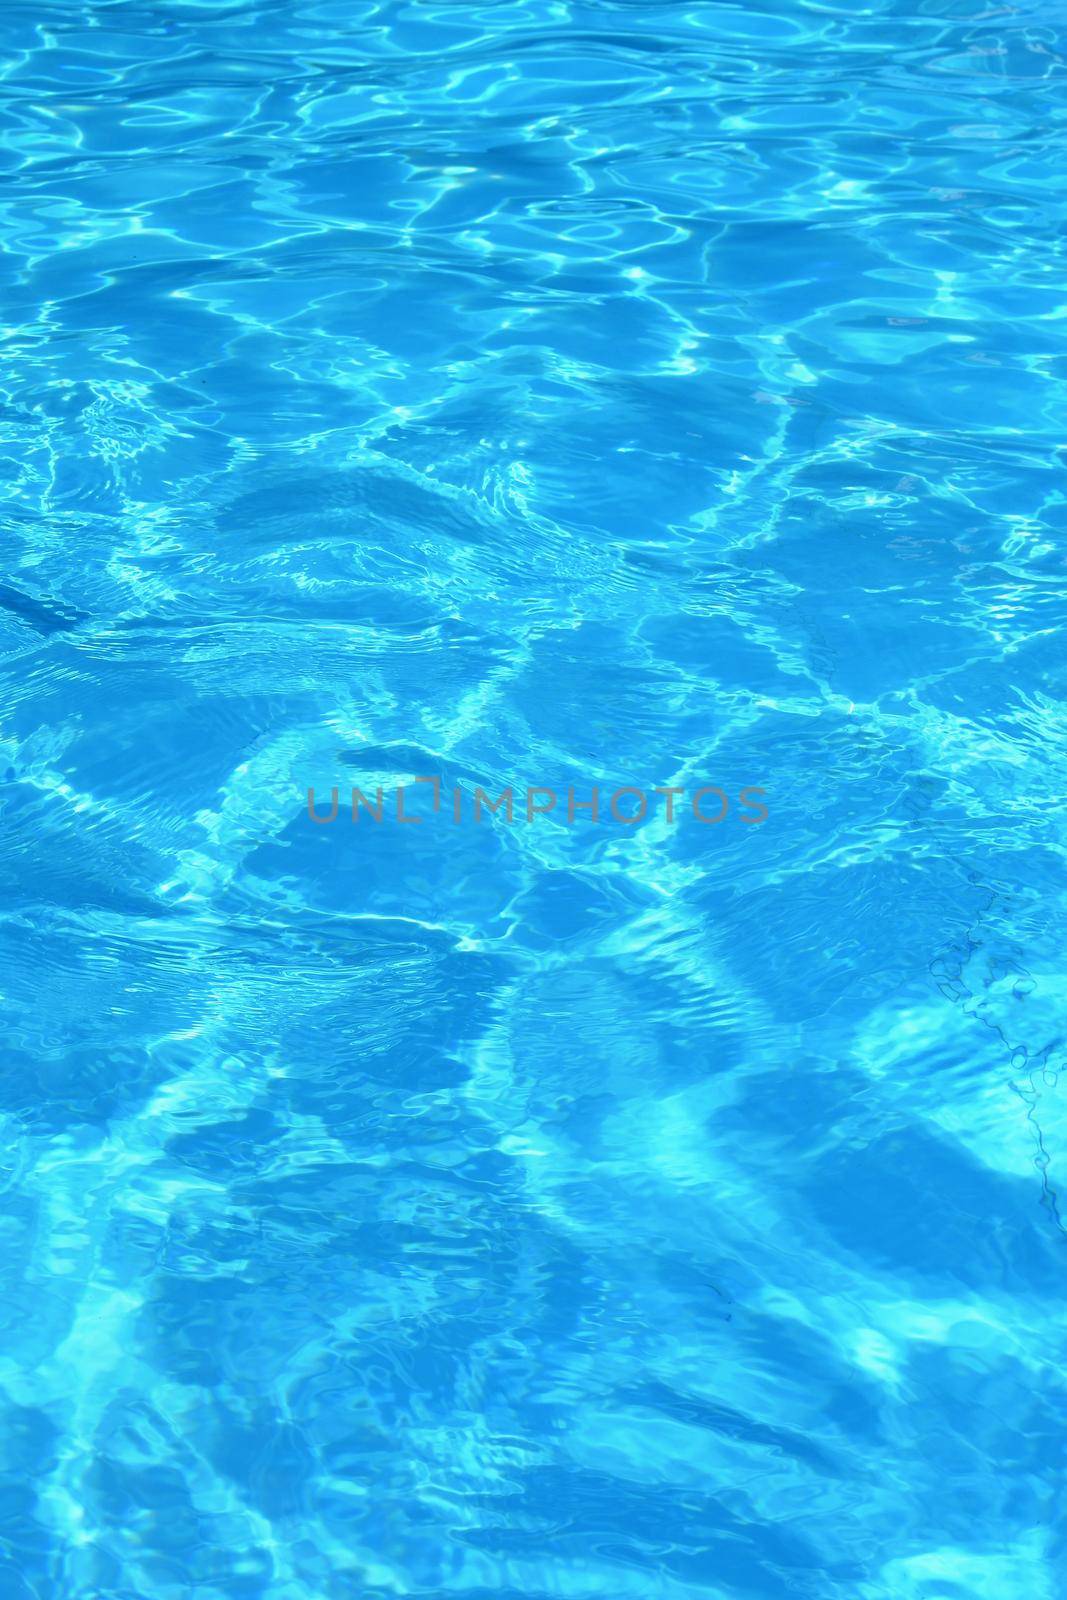 Pool with clean water. Summer background for traveling.